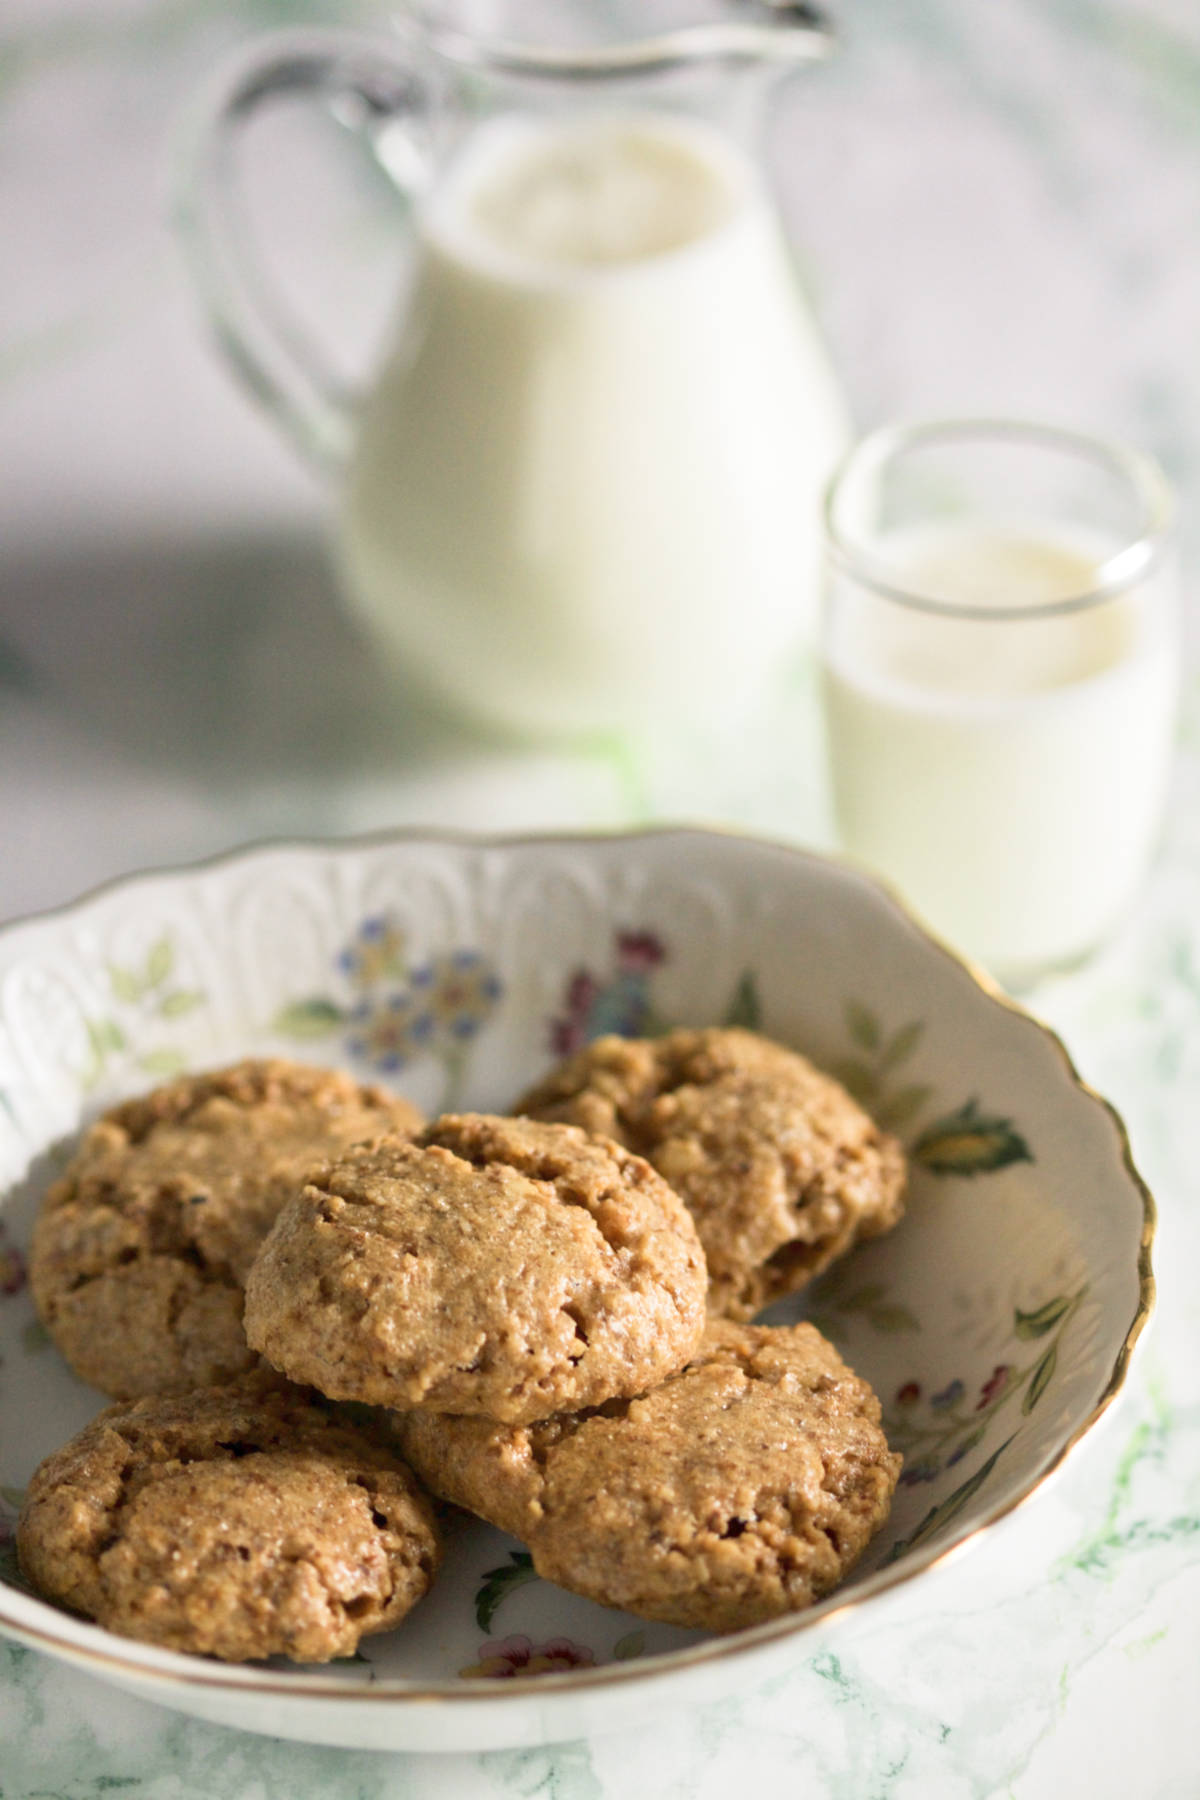 A plate with five walnut cookies, a pitcher with milk and a small glass of milk on a marble background.